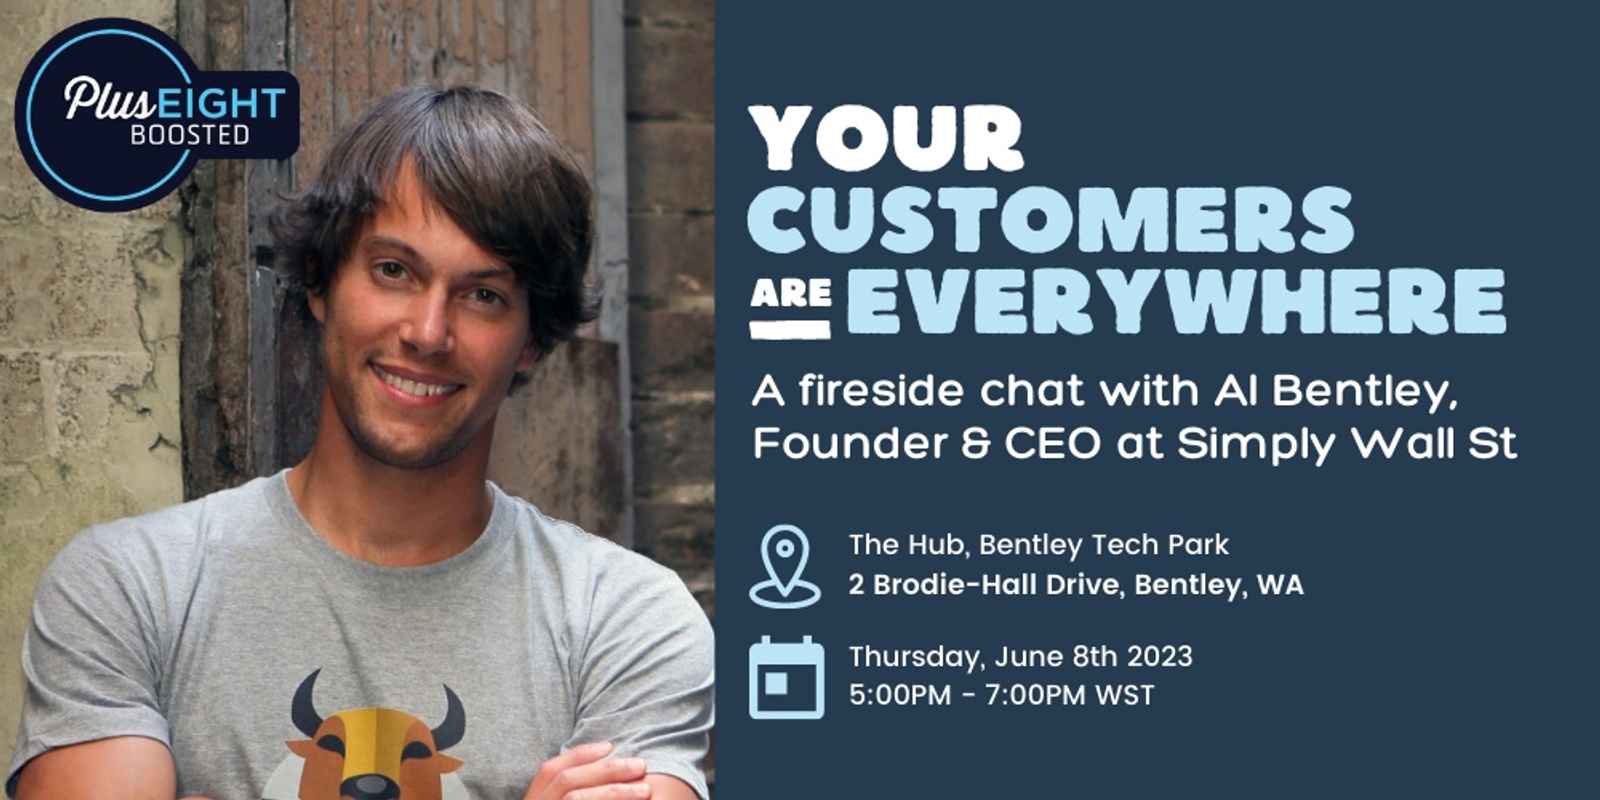 Banner image for Plus Eight Boosted: Your Customers are Everywhere, a Fireside Chat with Al Bentley from Simply Wall St.